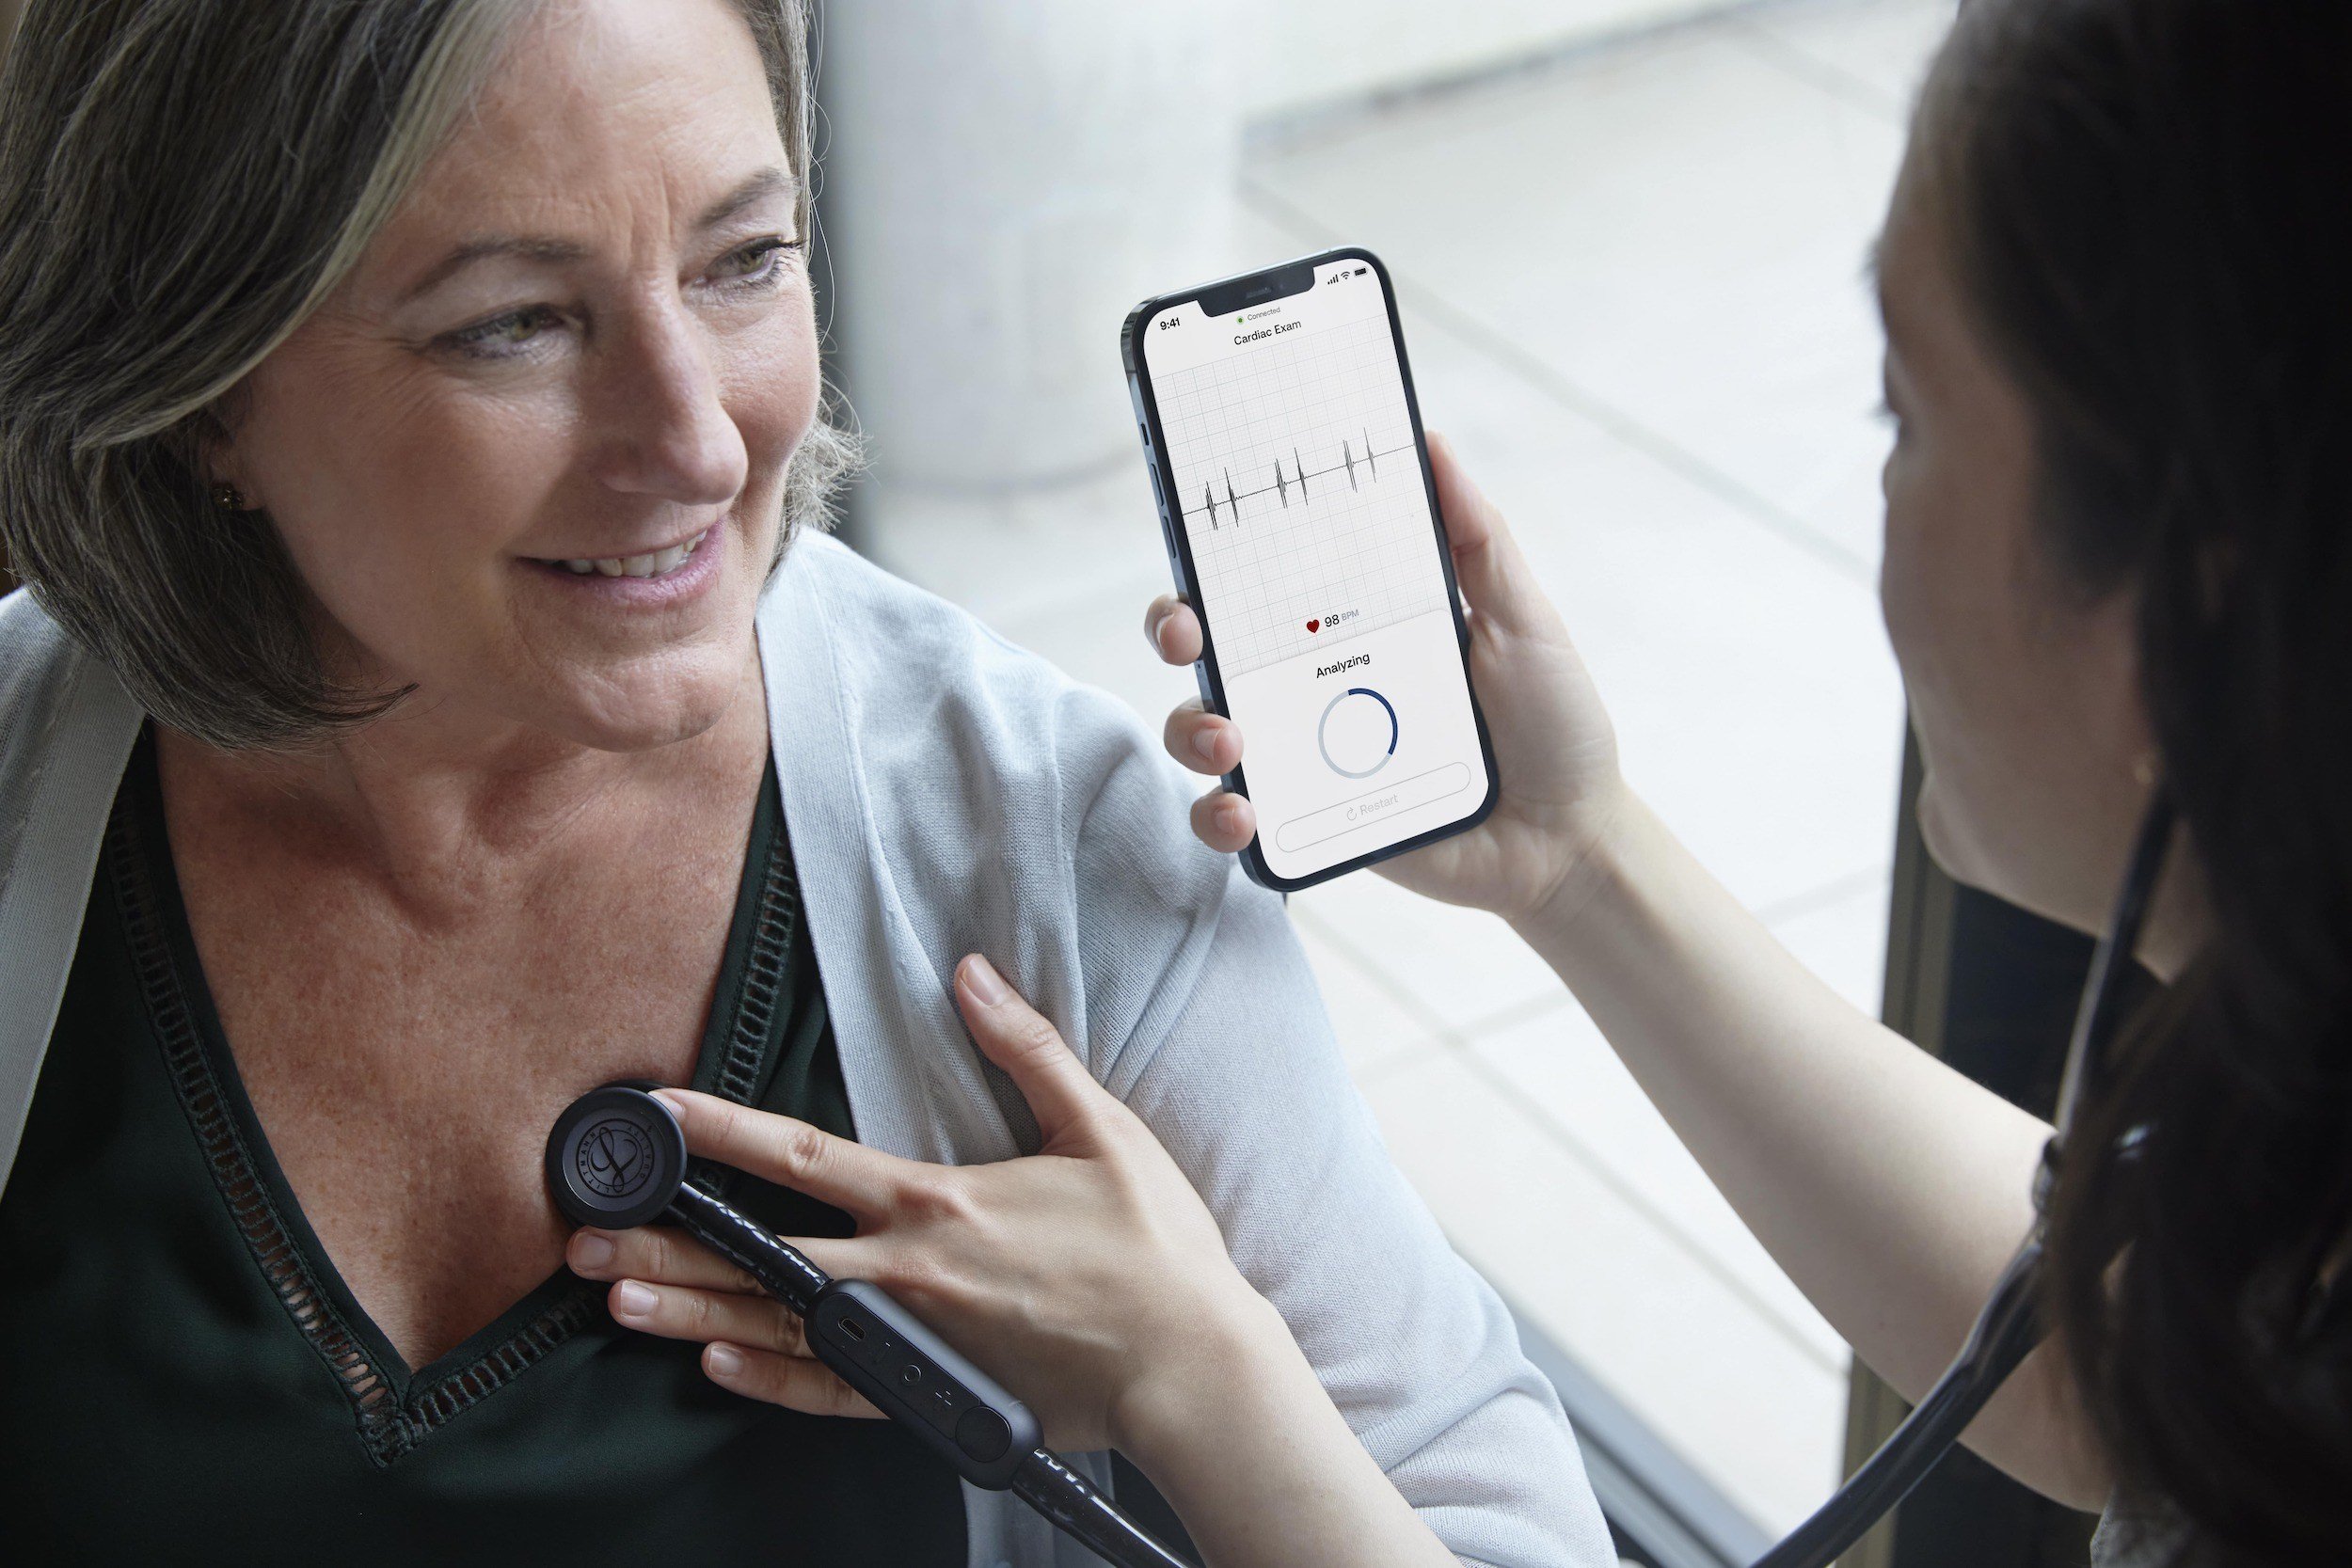 Eko rolls out AI-powered stethoscopes to UK clinics through Imperial College London 